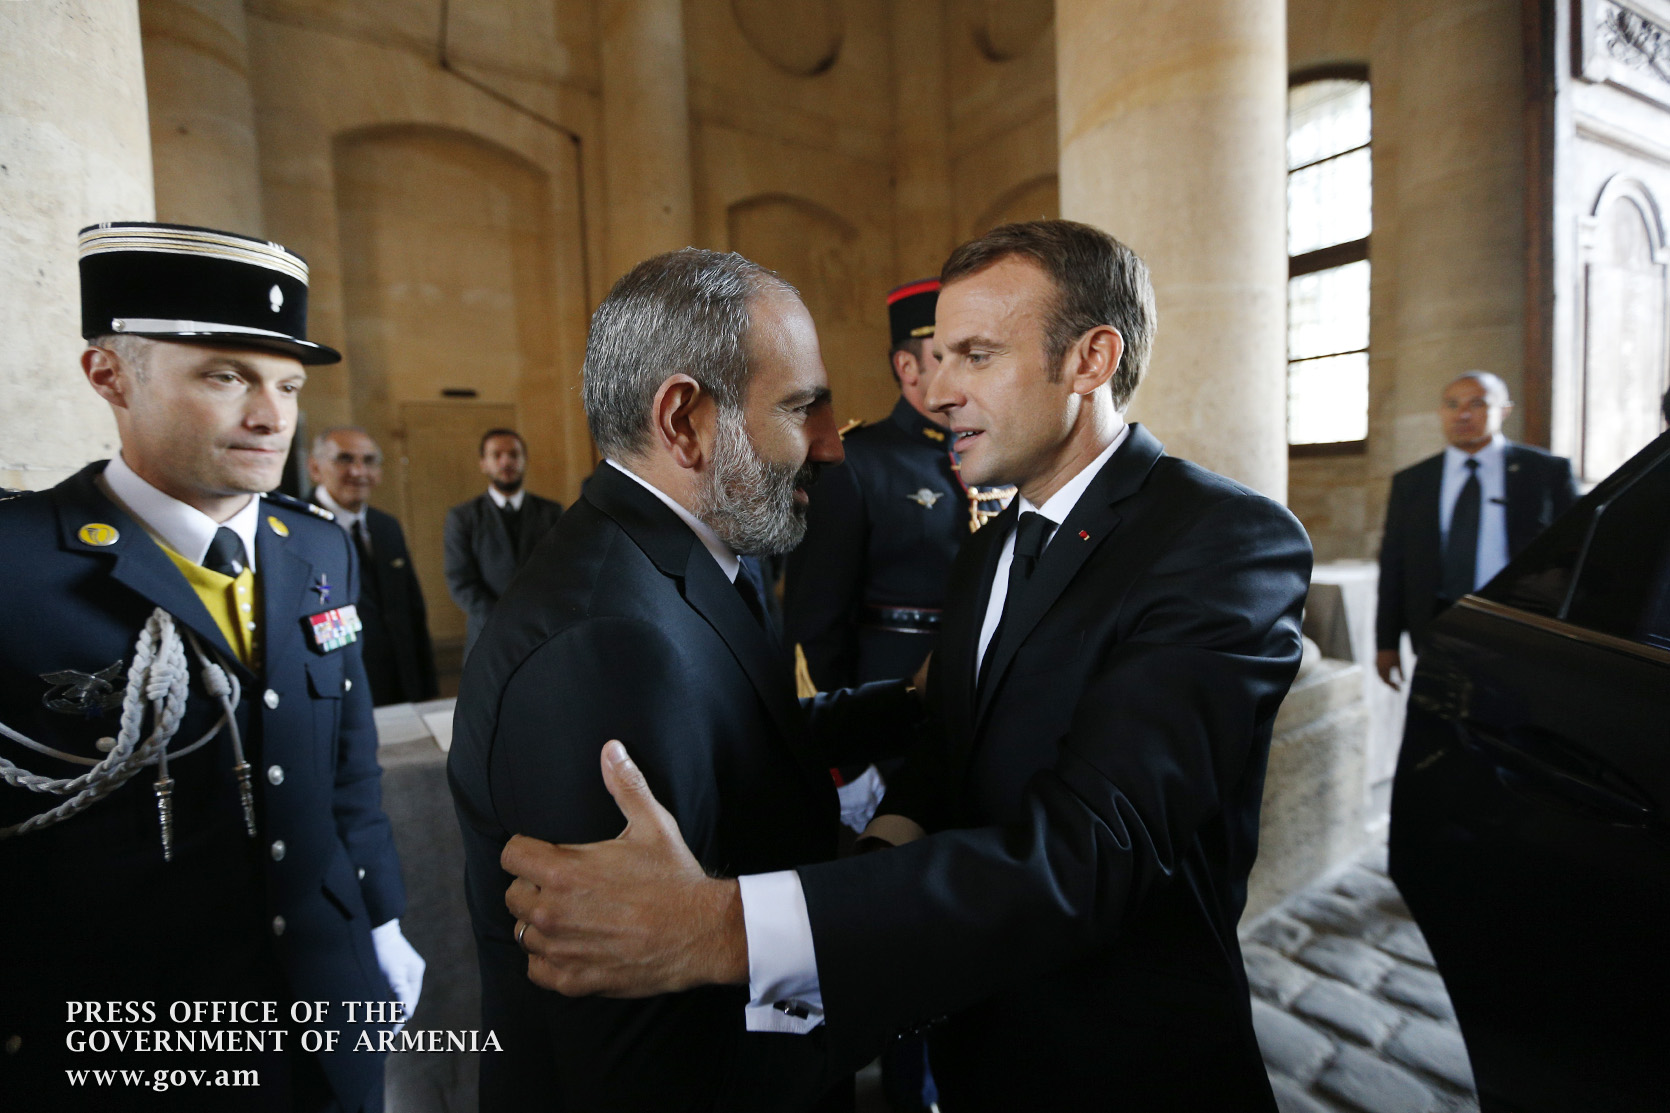 Nikol Pashinyan, Emmanuel Macron attend national homage ceremony, deliver speeches honoring Charles Aznavour in Paris